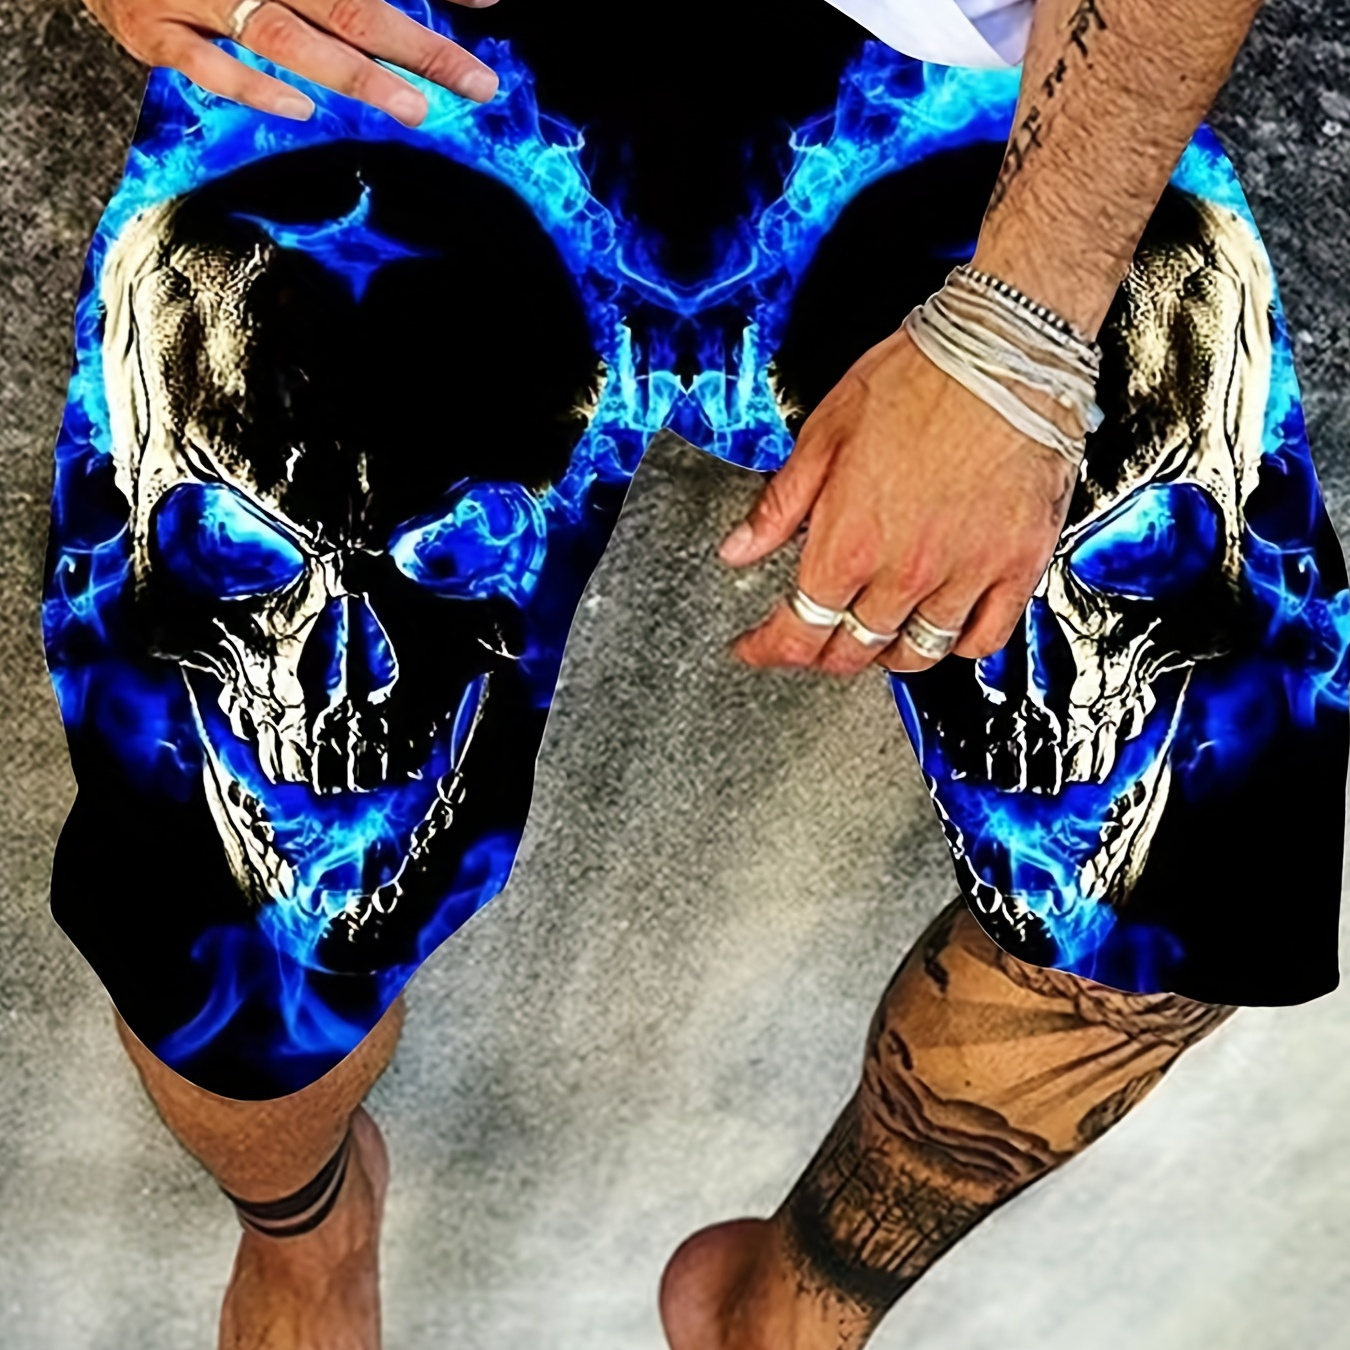 

Lightning Graphic Shorts - Comfortable And Stylish Men's Summer Shorts With Elastic Waist And 3d Print Design